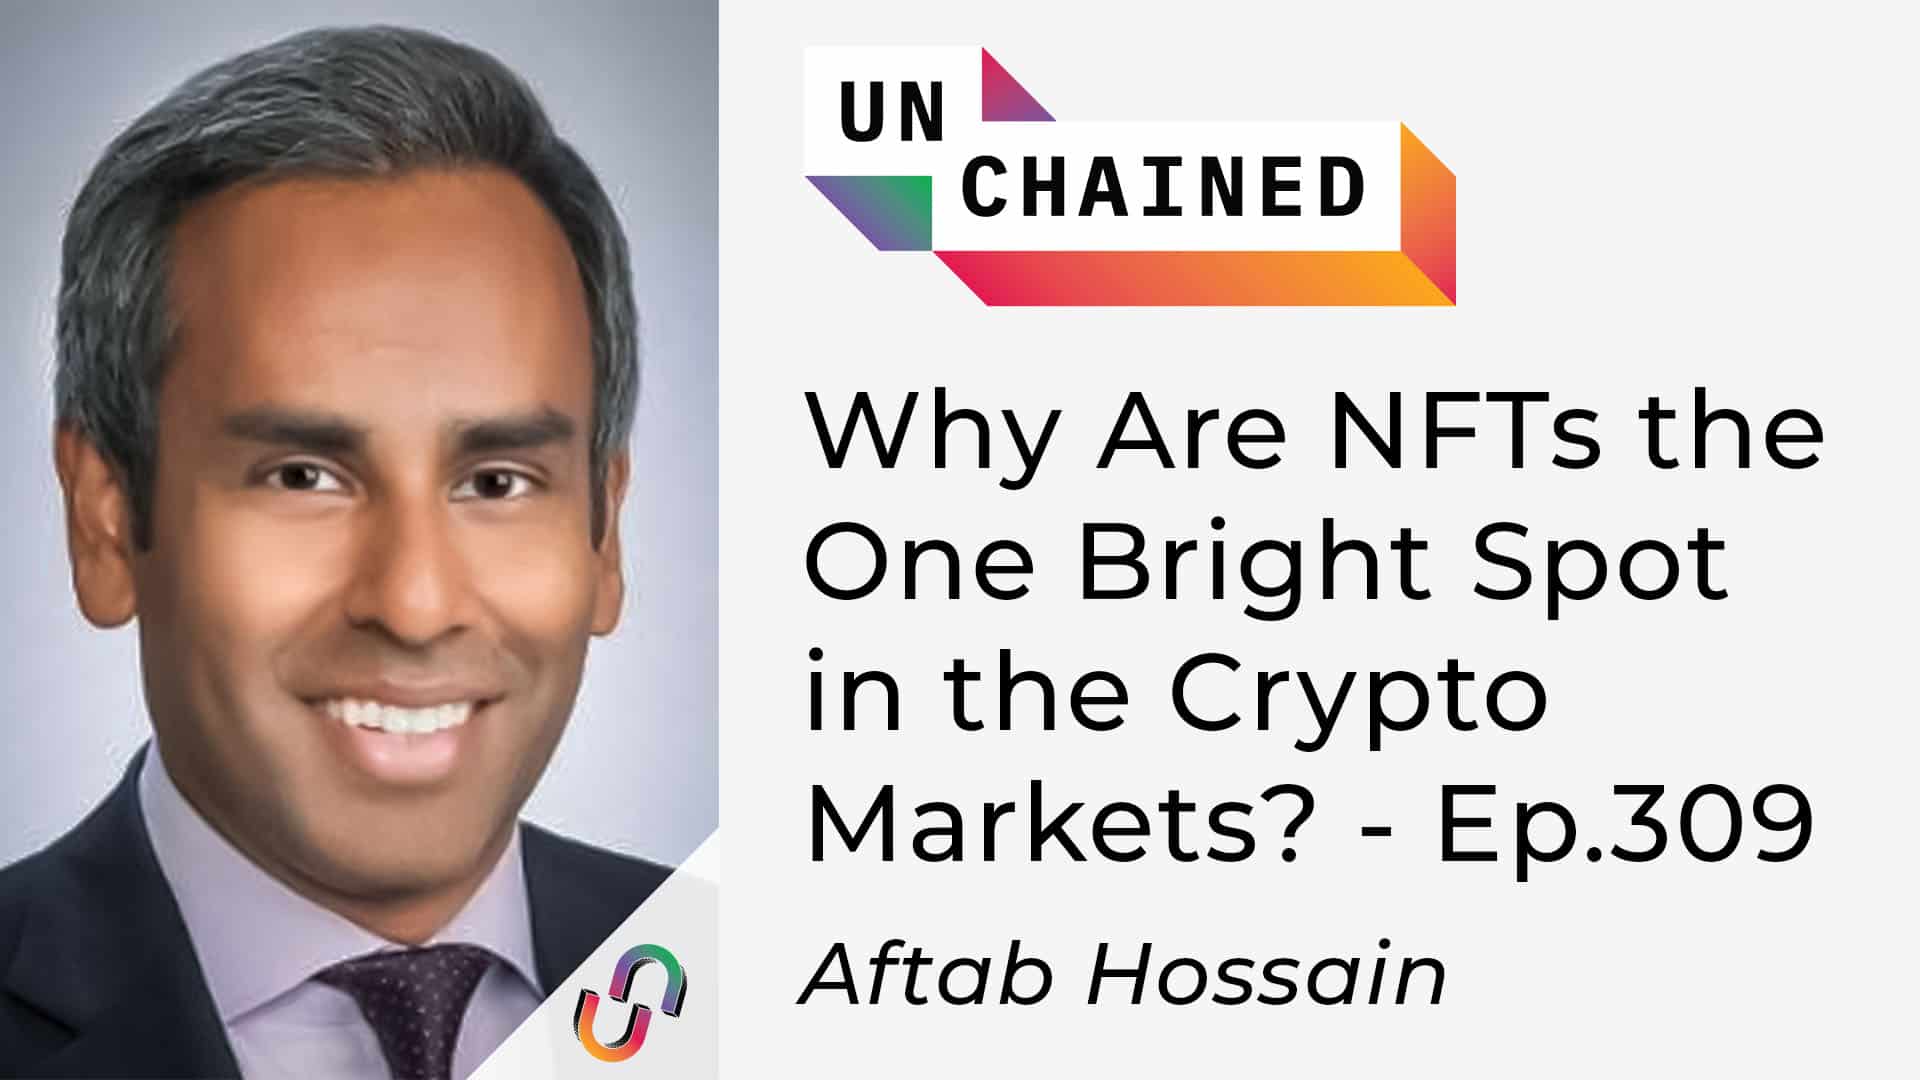 Why Are NFTs the One Bright Spot in the Crypto Markets?